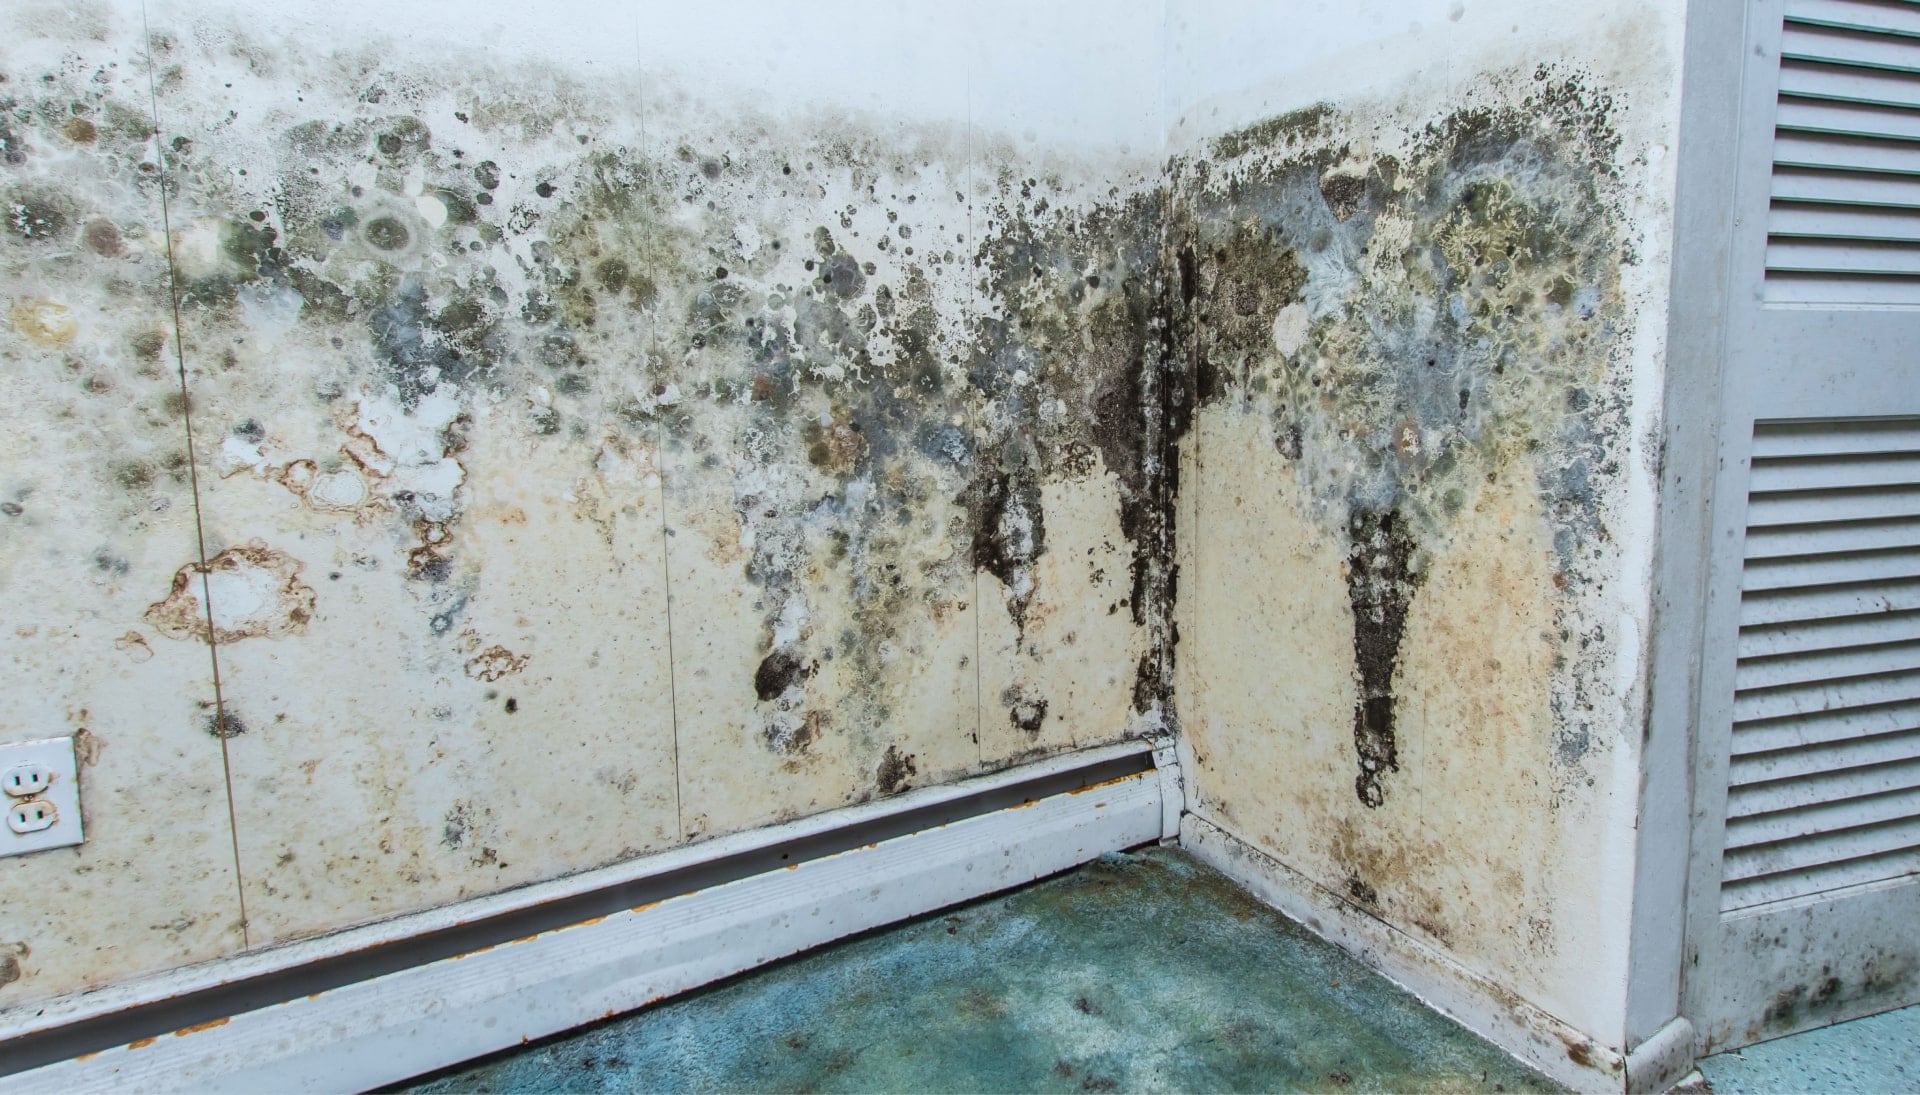 Professional mold removal, odor control, and water damage restoration service in Phoenix, Arizona.